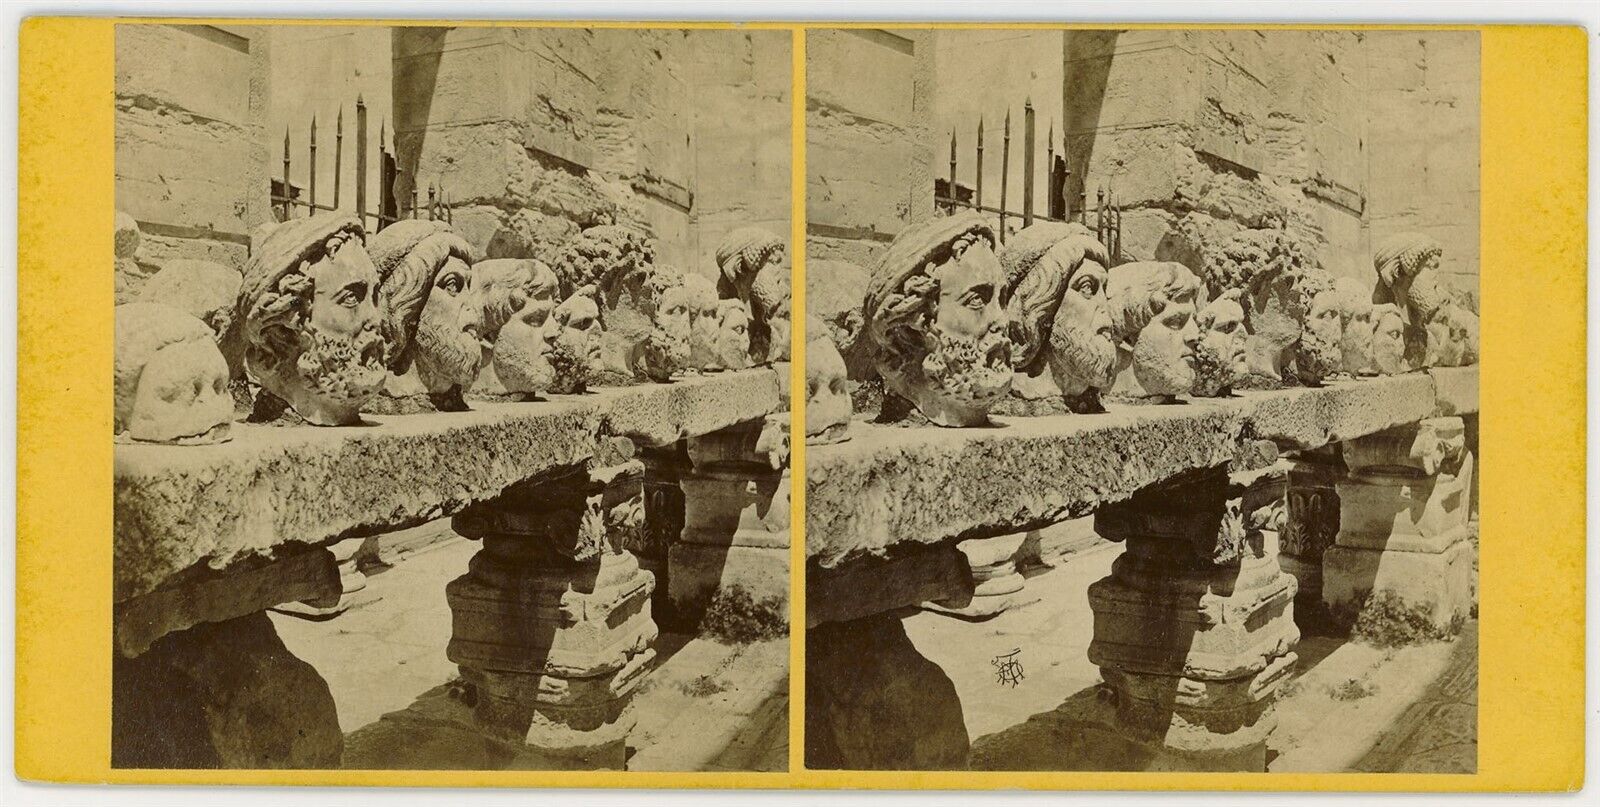 GREECE SV - Athens - Sculpted Heads - Frank Good 1860s